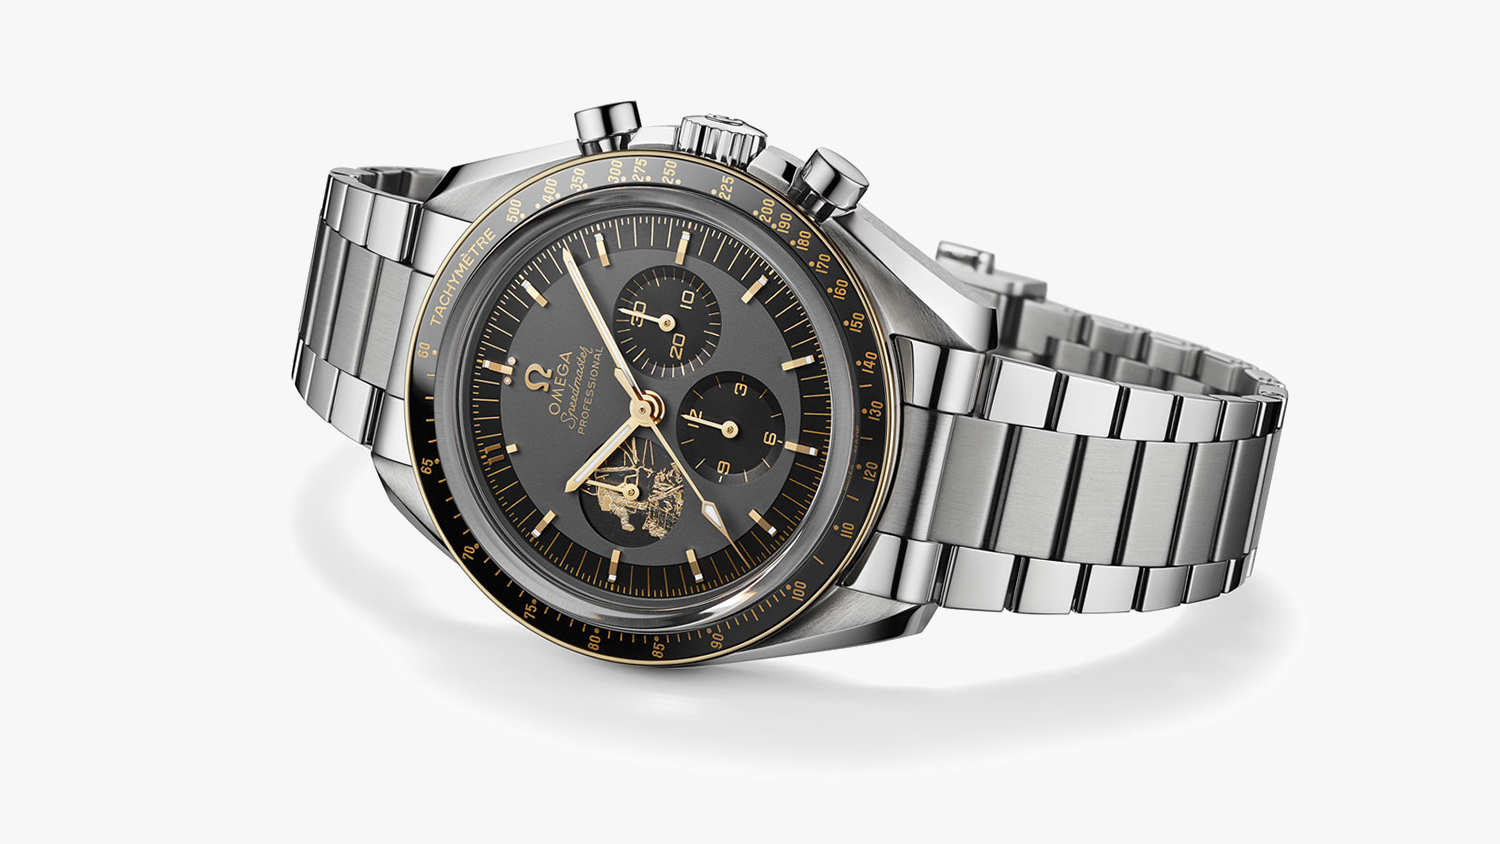 The Omega Apollo 11 Moonwatch - It’s Rocket Science.